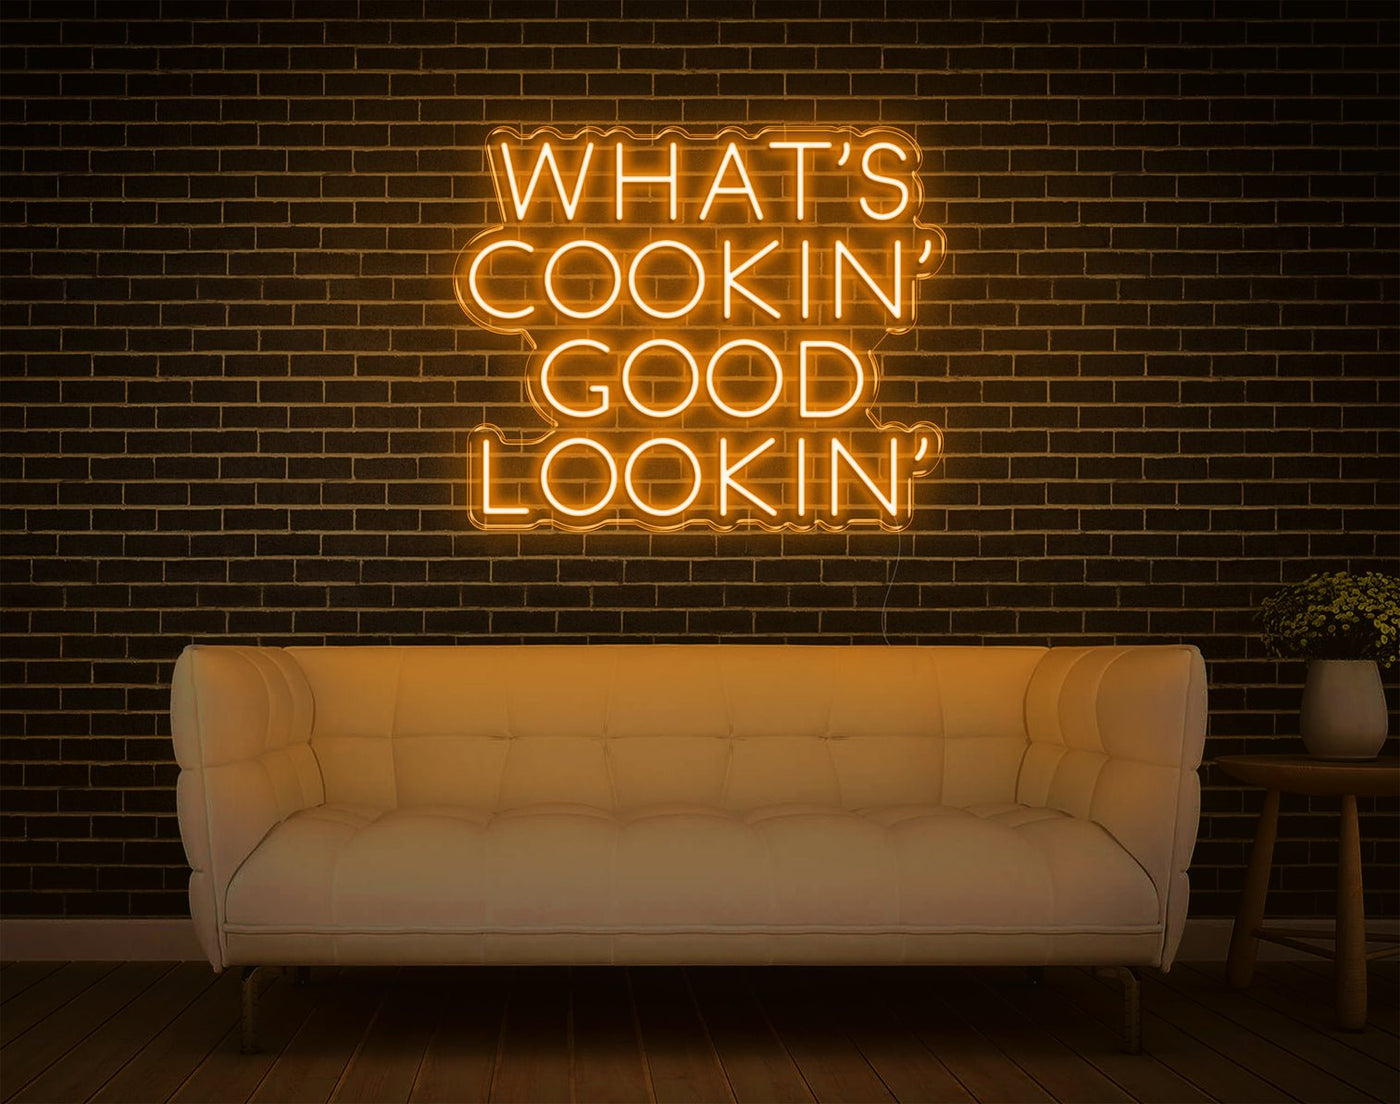 What's Cookin' Good Lookin' LED Neon Sign - 21inch x 25inchHot Pink